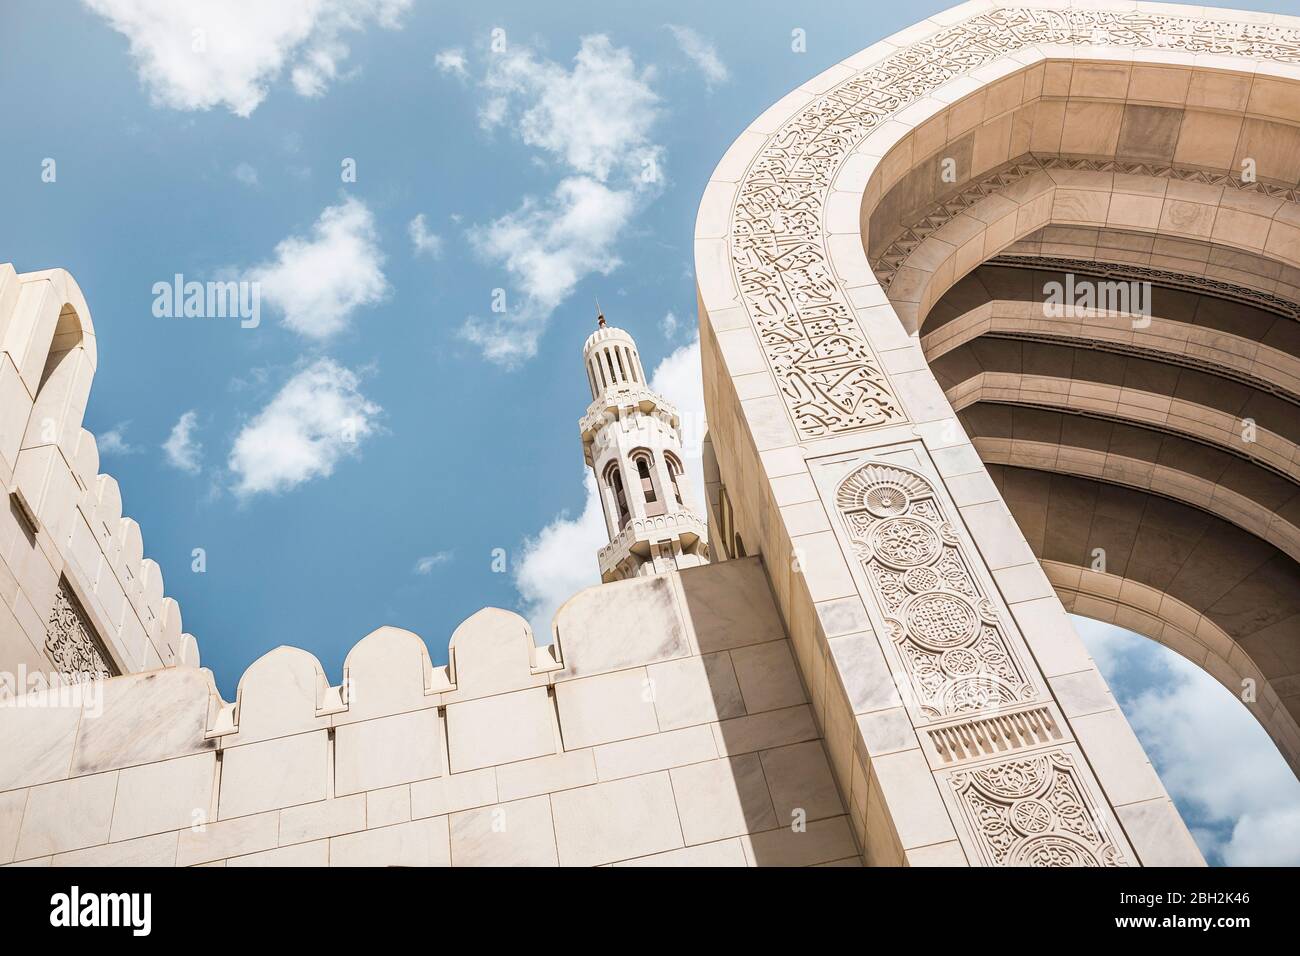 Oman, Muscat, Low angle view of exterior archway of Sultan Qaboos Grand Mosque Stock Photo